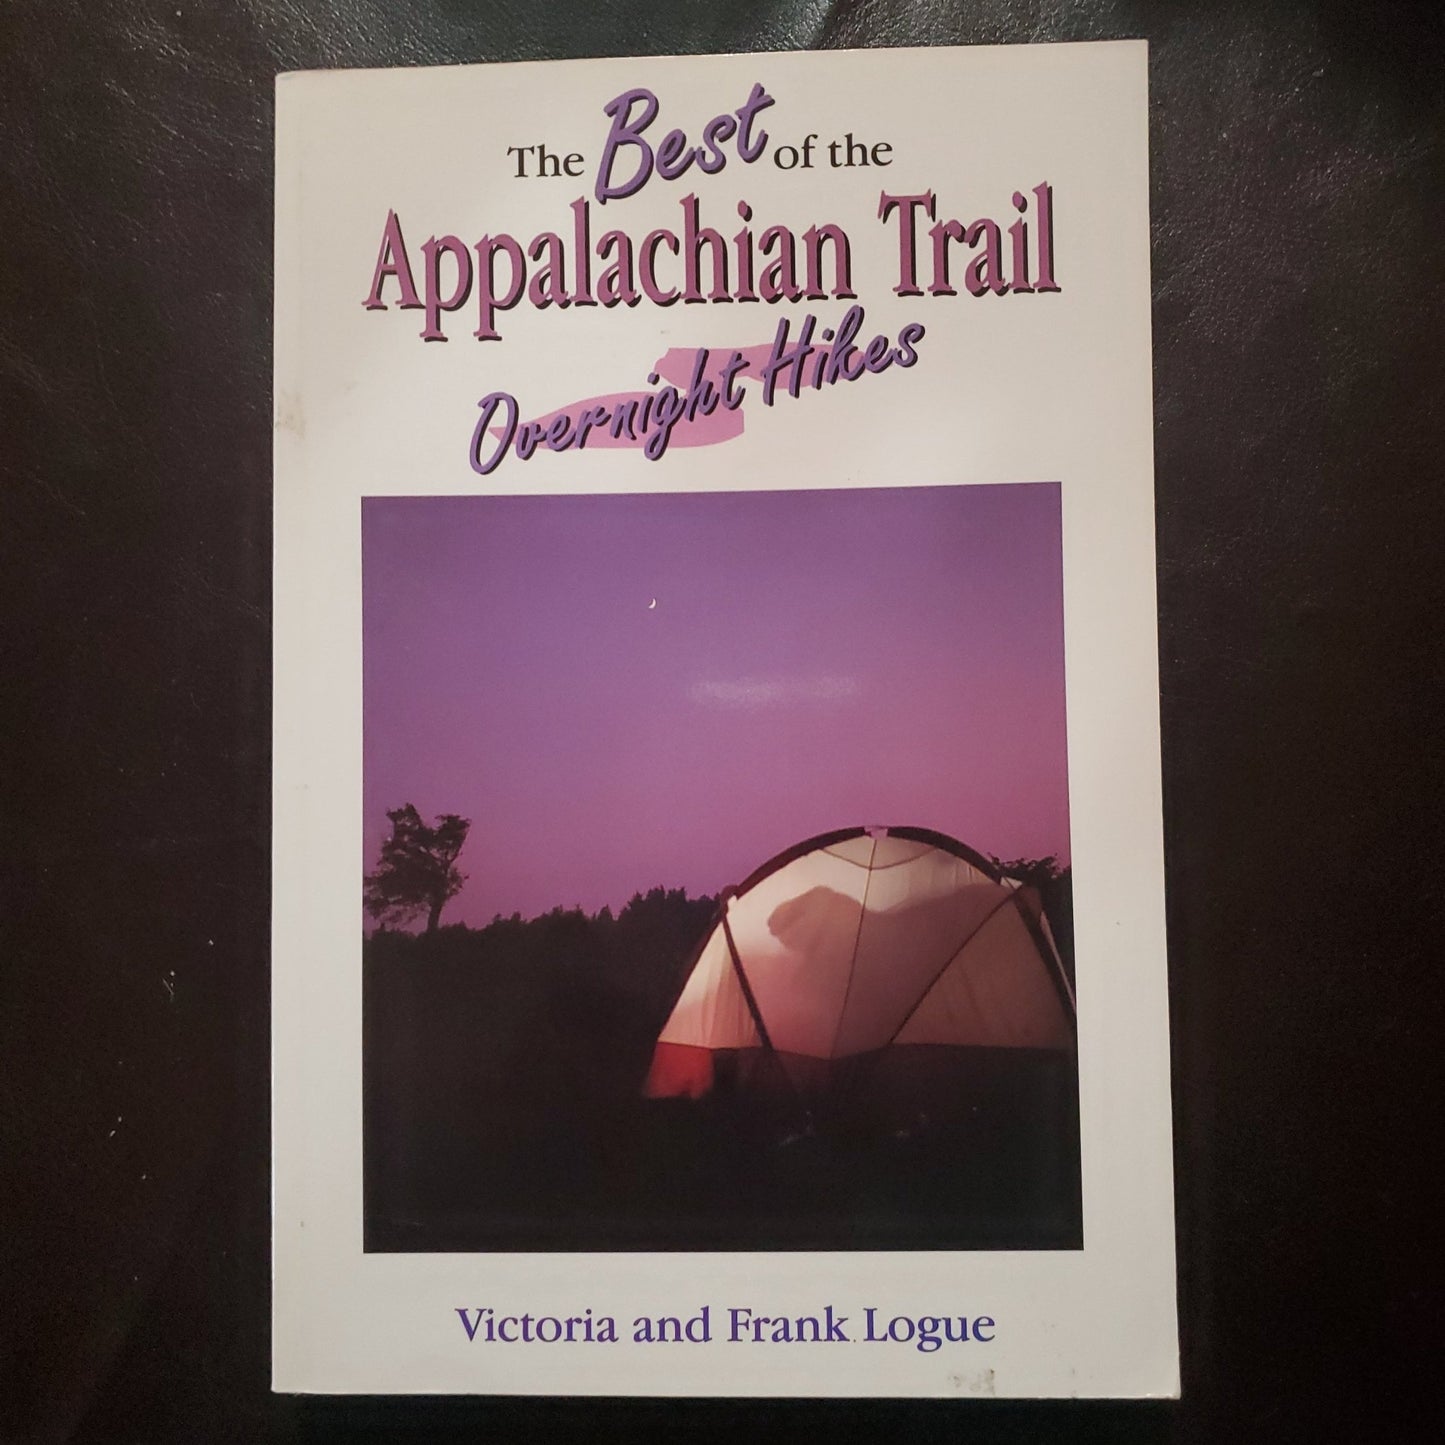 The Best of the Appalachian Trail: Overnight Hikes - [ash-ling] Booksellers